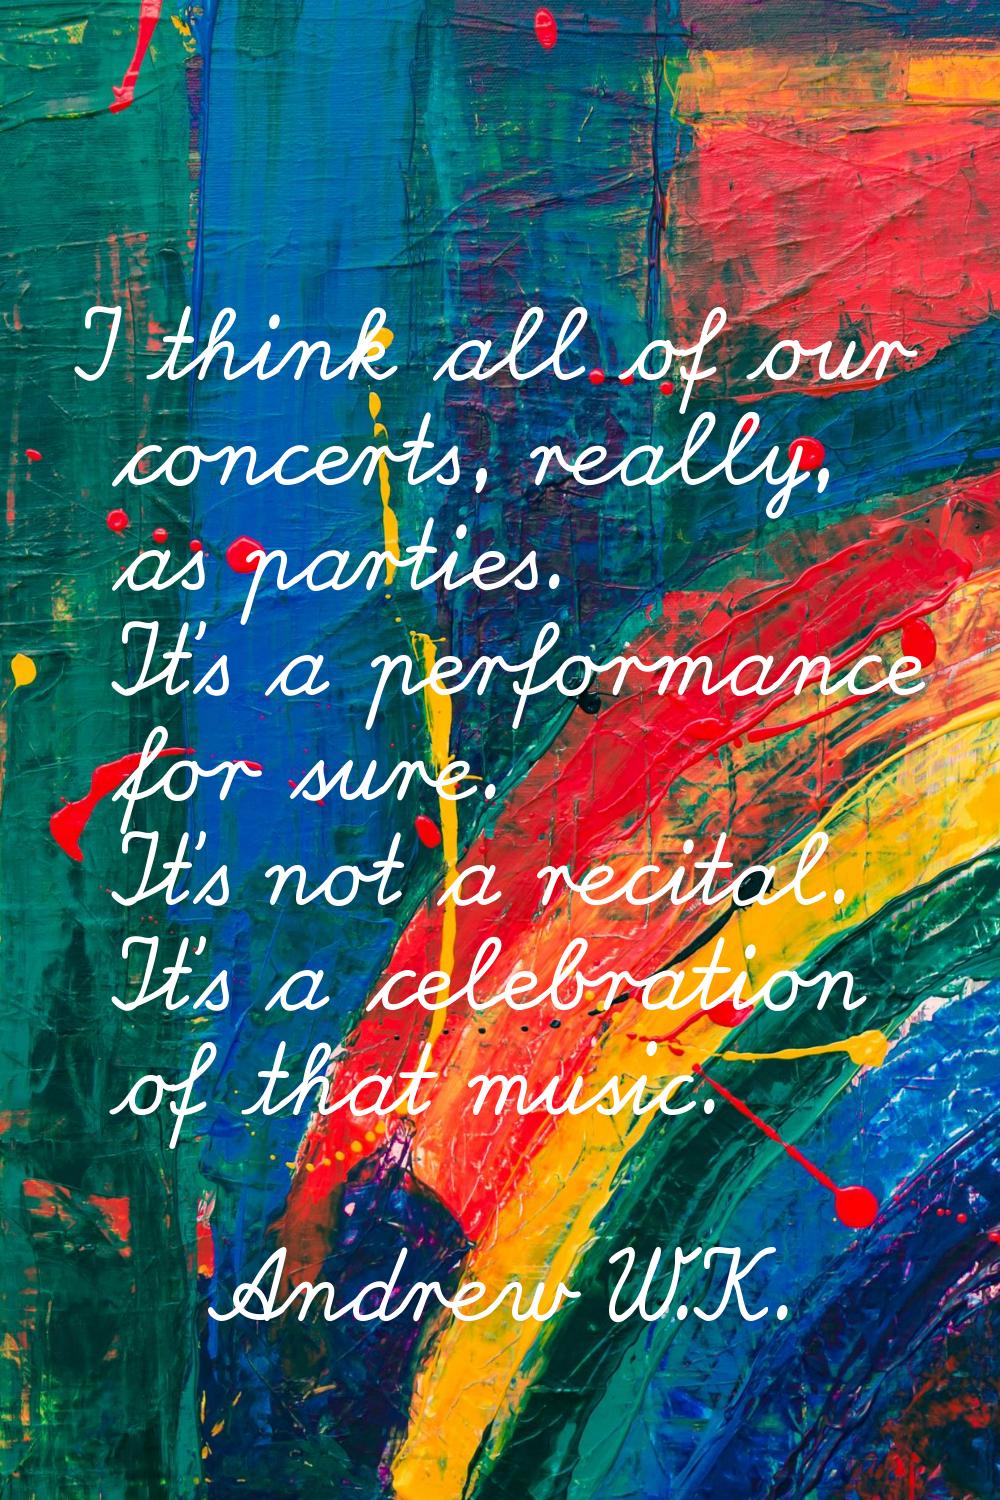 I think all of our concerts, really, as parties. It's a performance for sure. It's not a recital. I